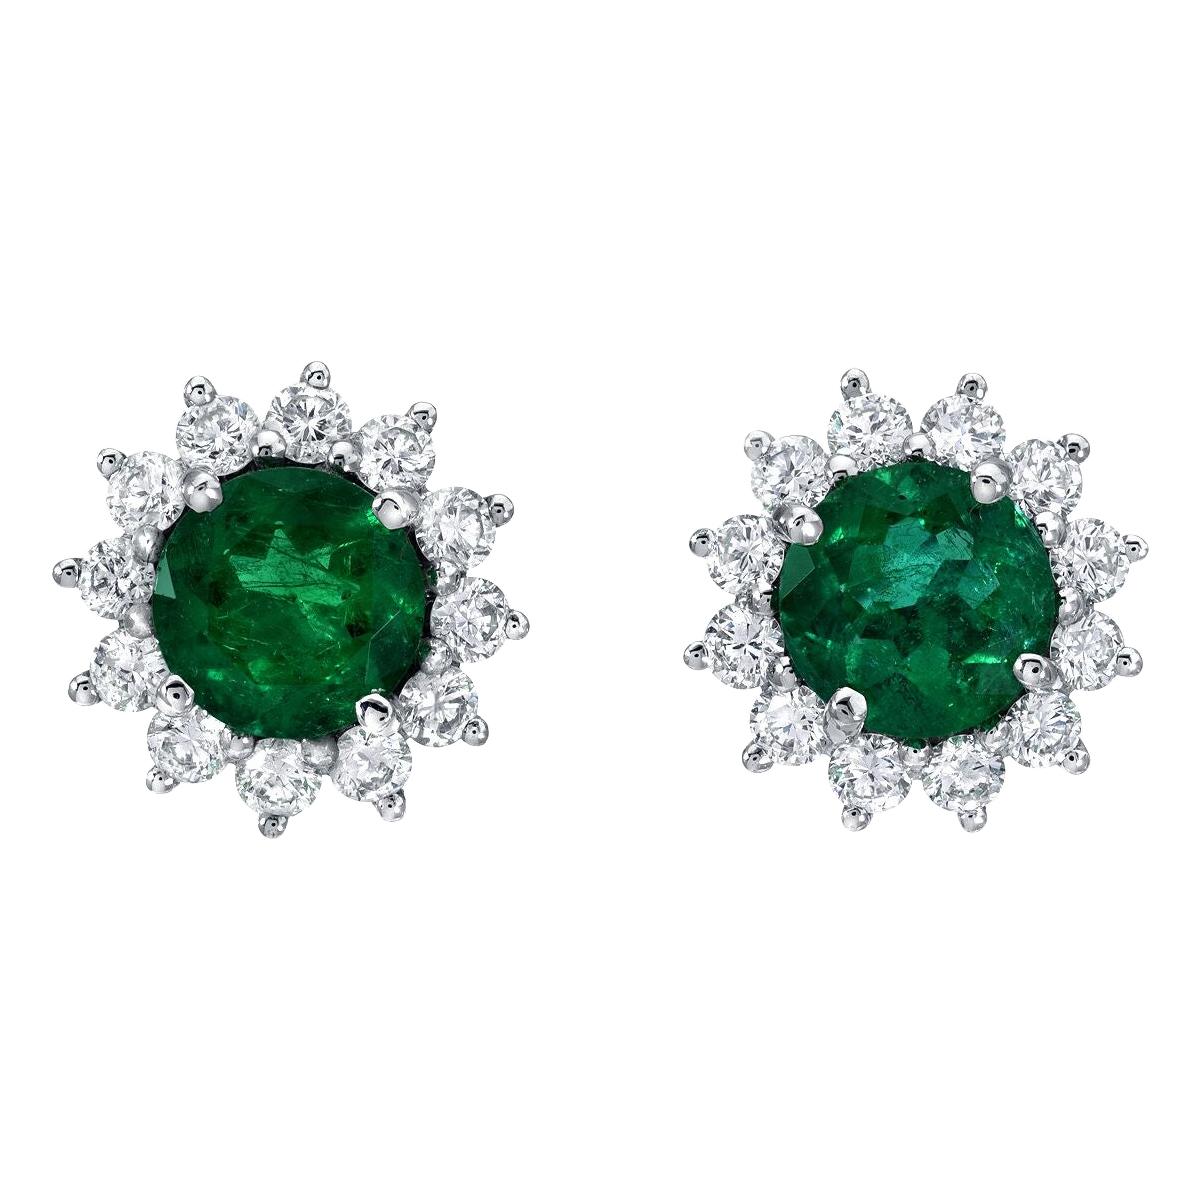 Emerald Stud Earrings Rounds 1.29 Carats